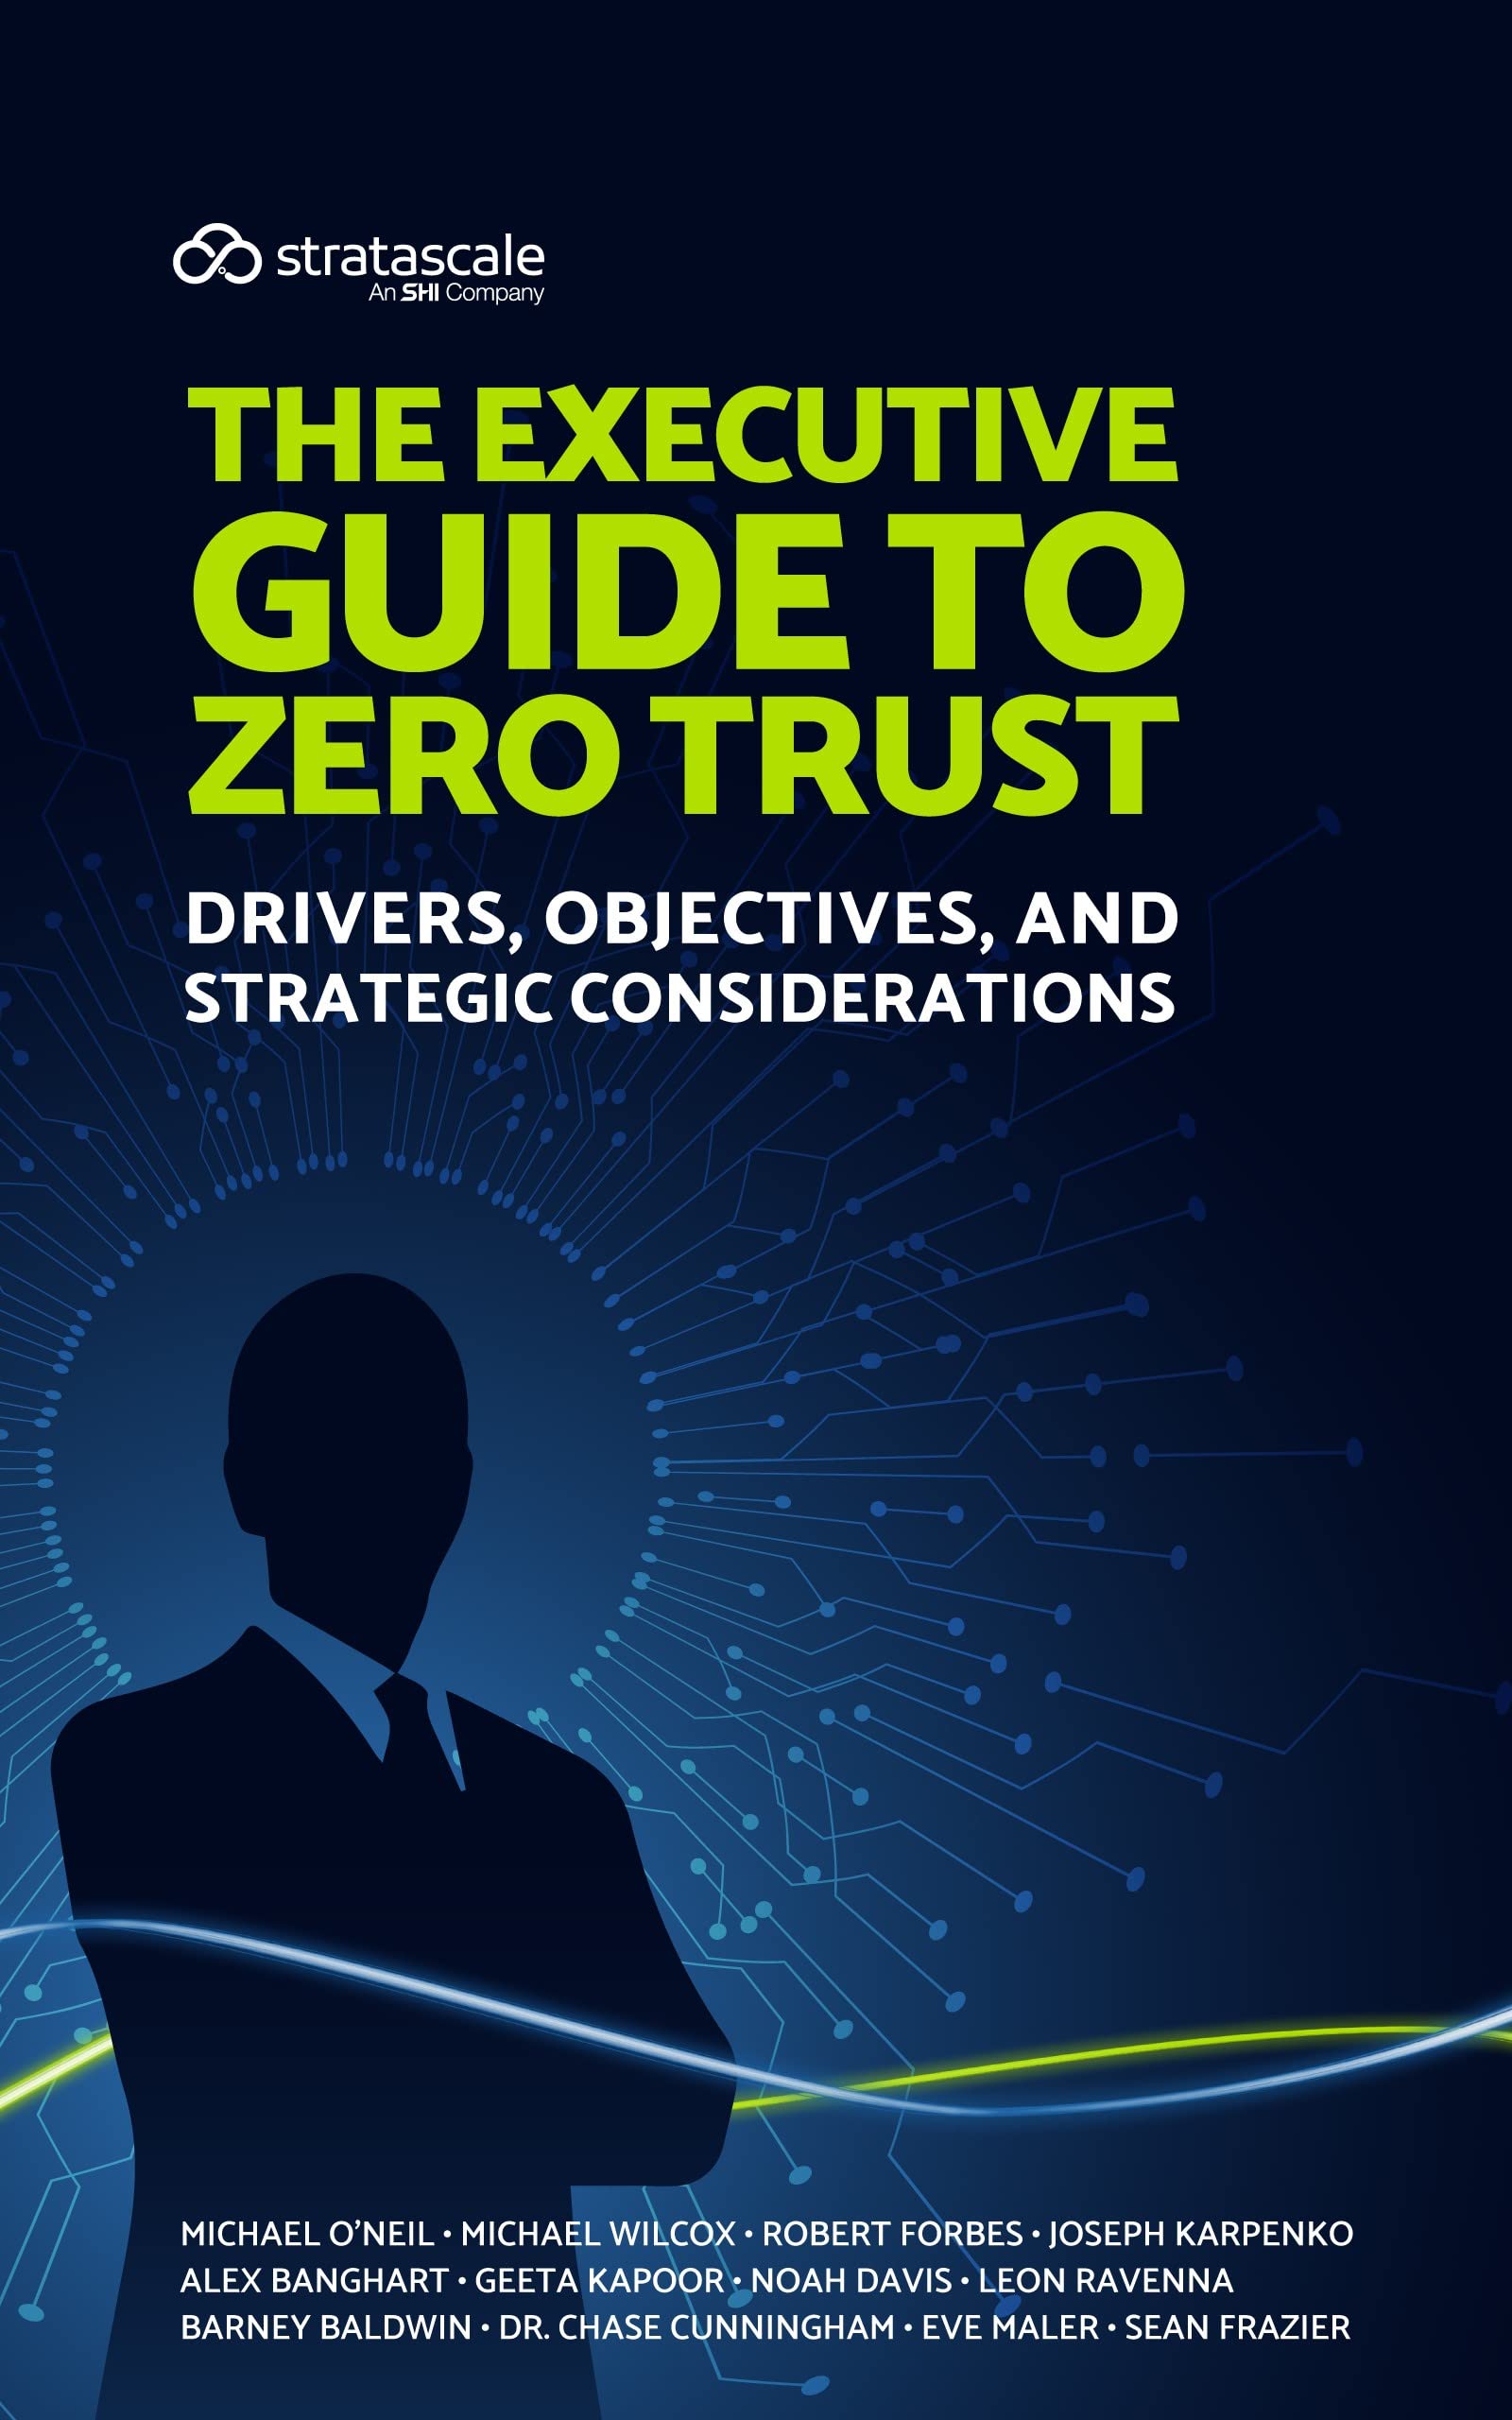 The Executive Guide to Zero Trust: Drivers, Objectives, and Strategic Considerations